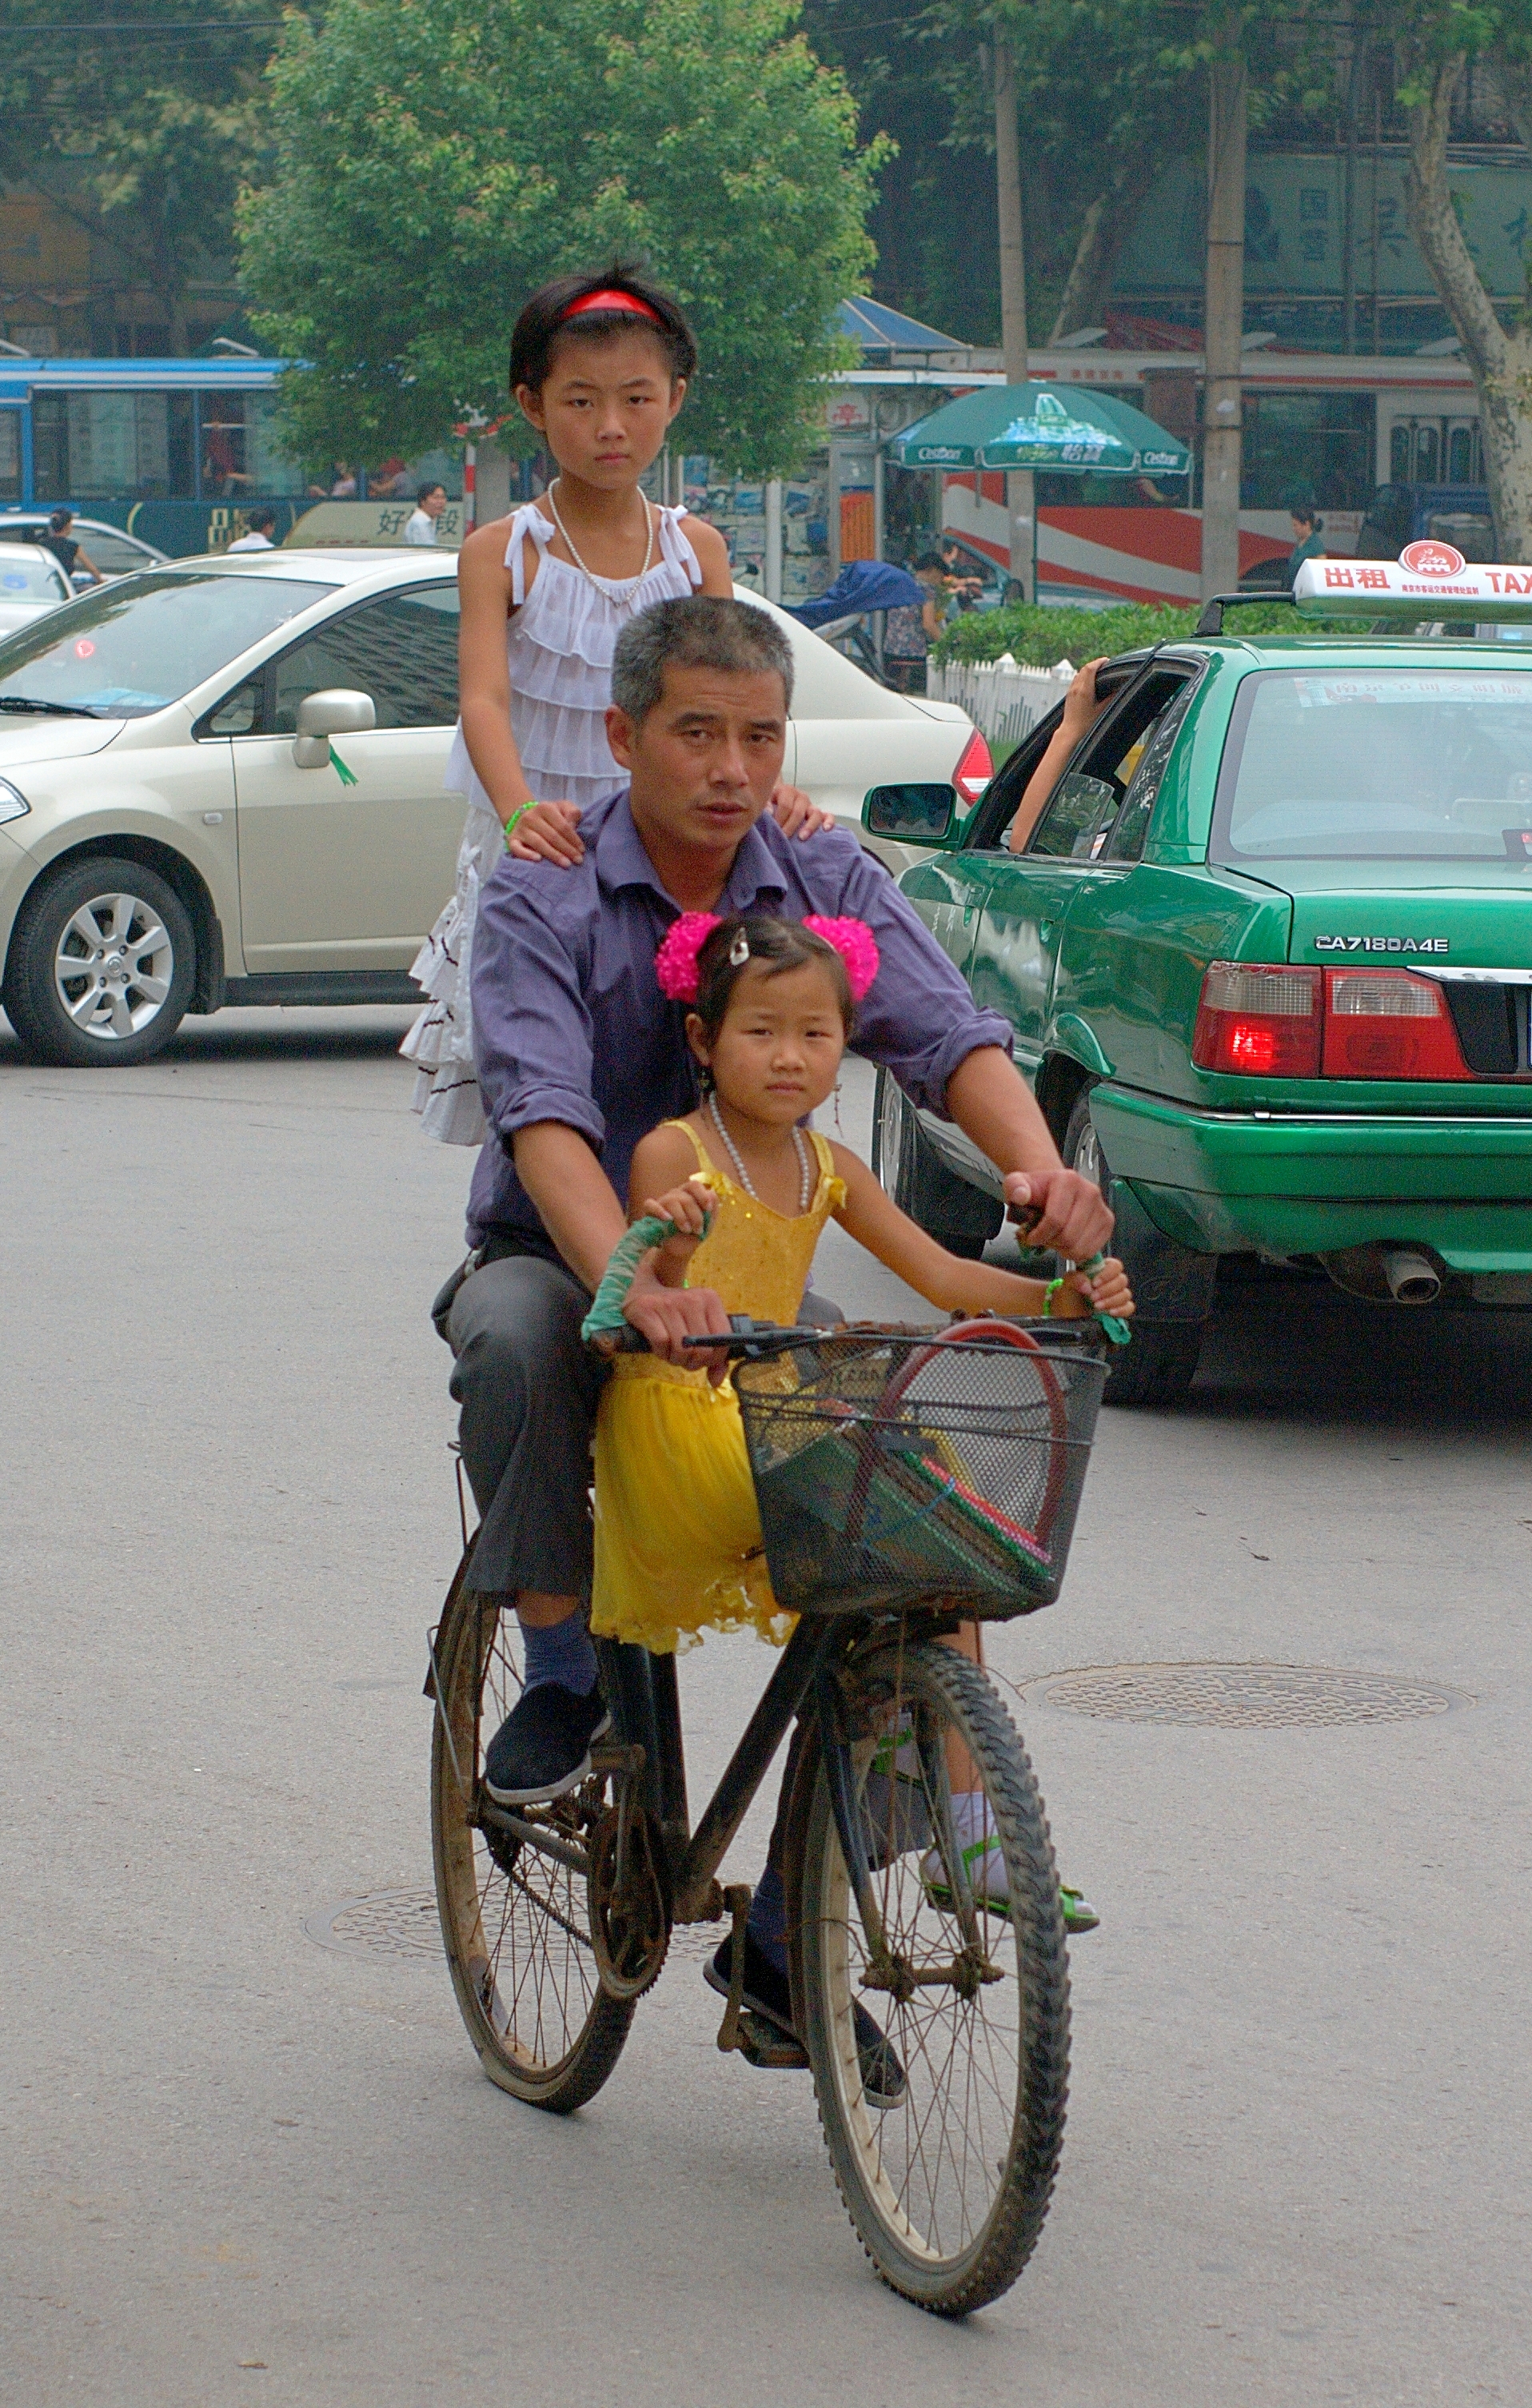 Man Riding a bike with two kids